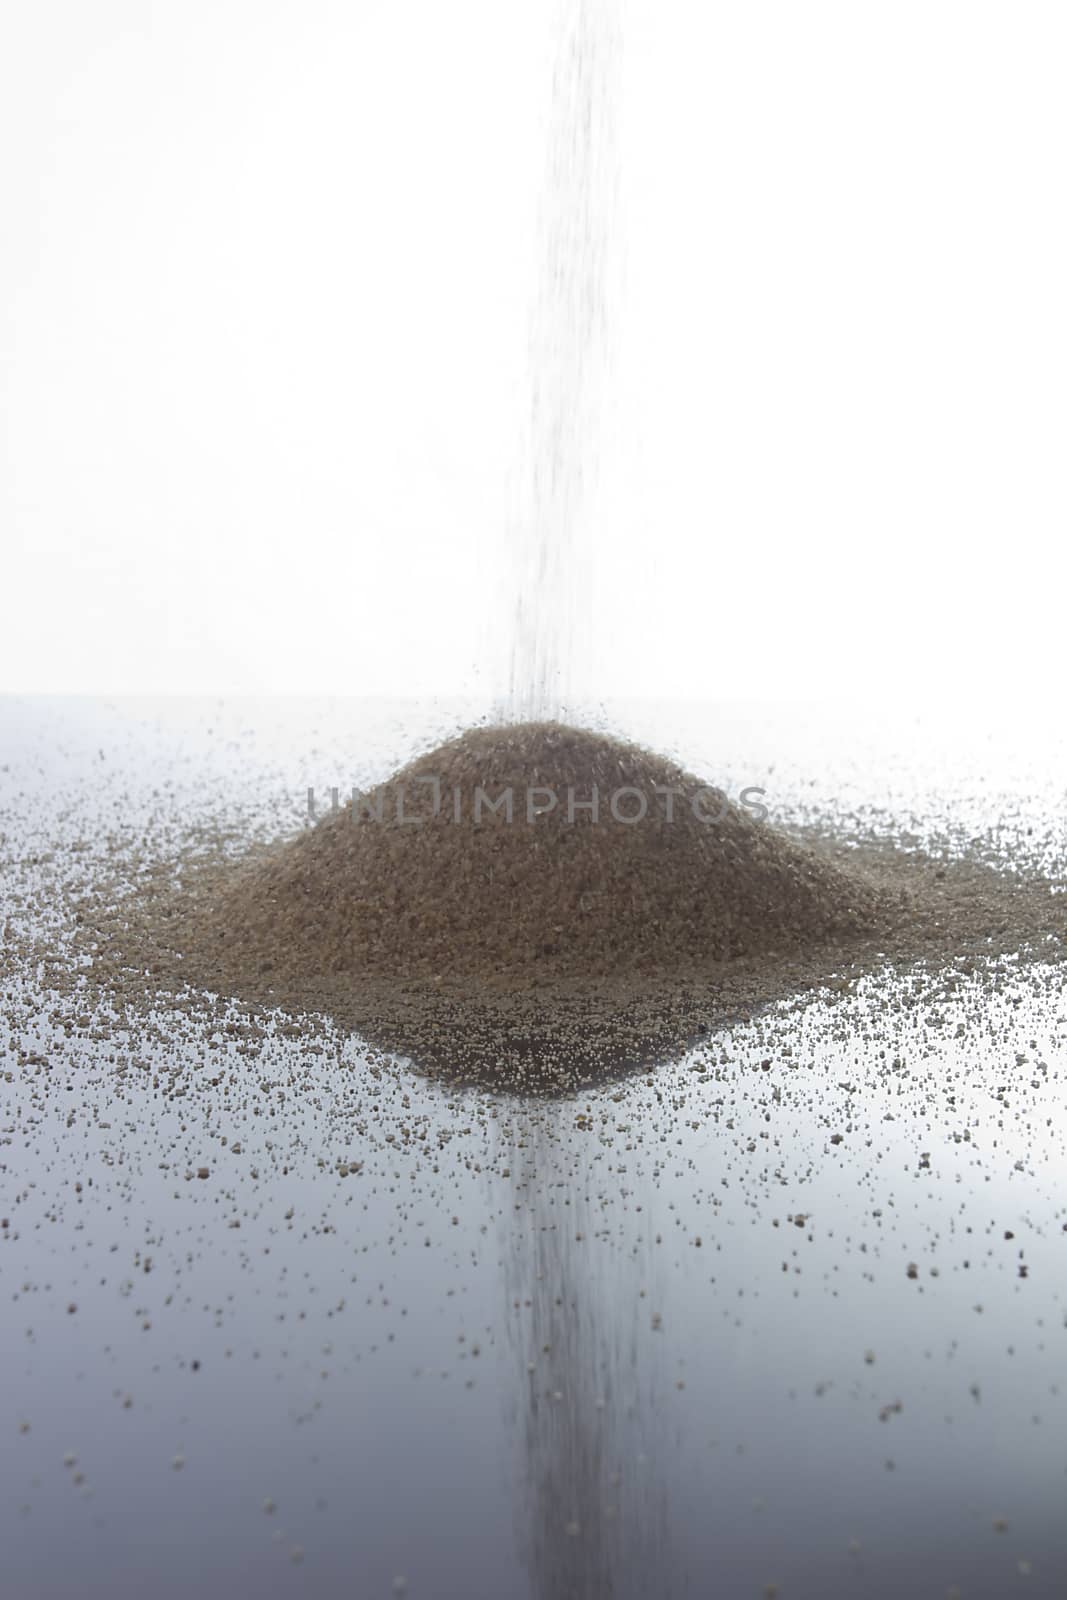 Pile of sand on a white reflective surface